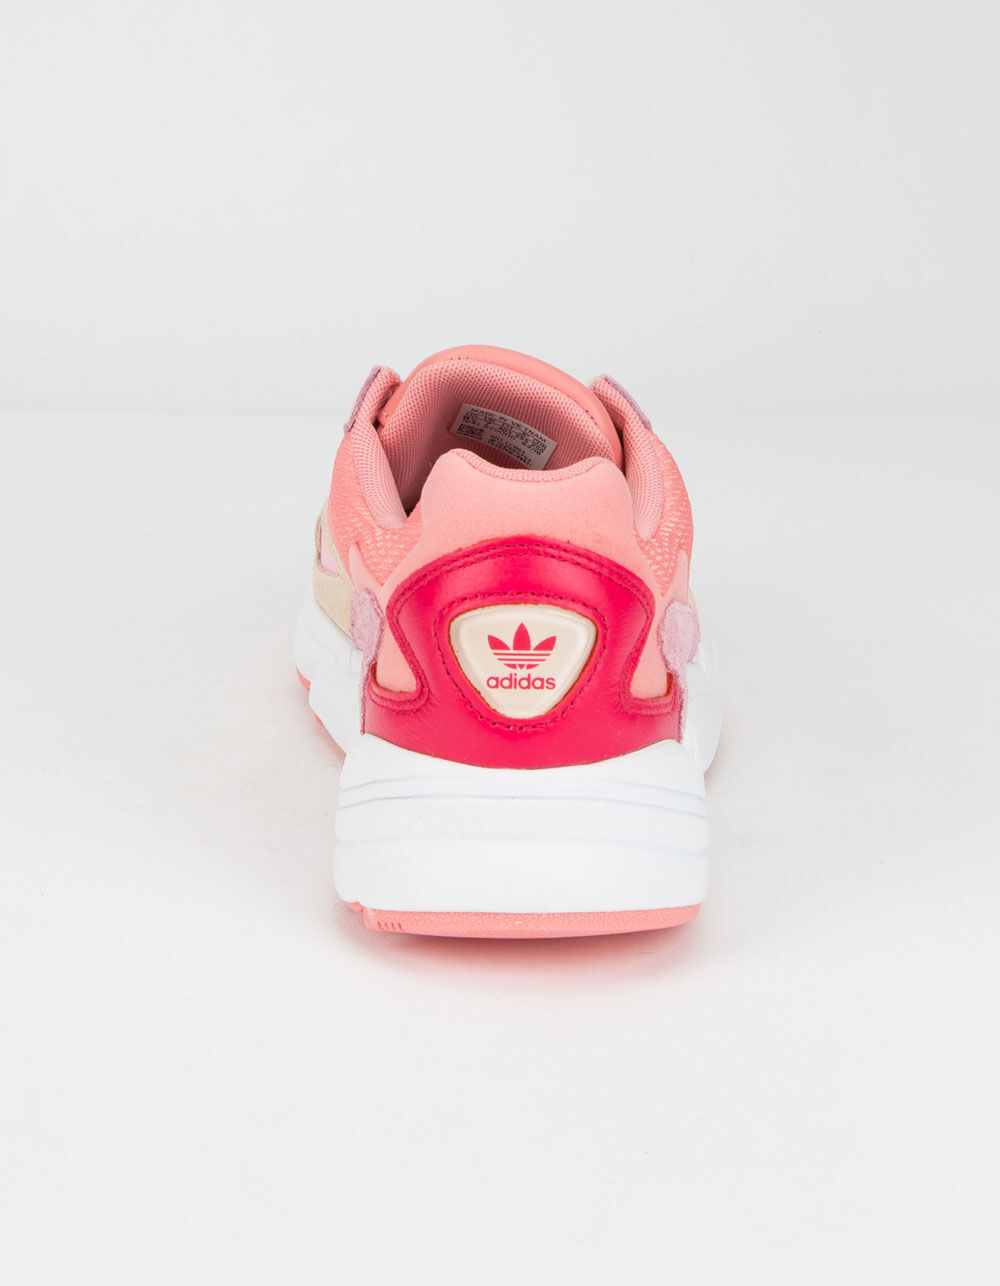 ADIDAS Falcon Ecru Tint & Icey Pink Womens Shoes image number 4